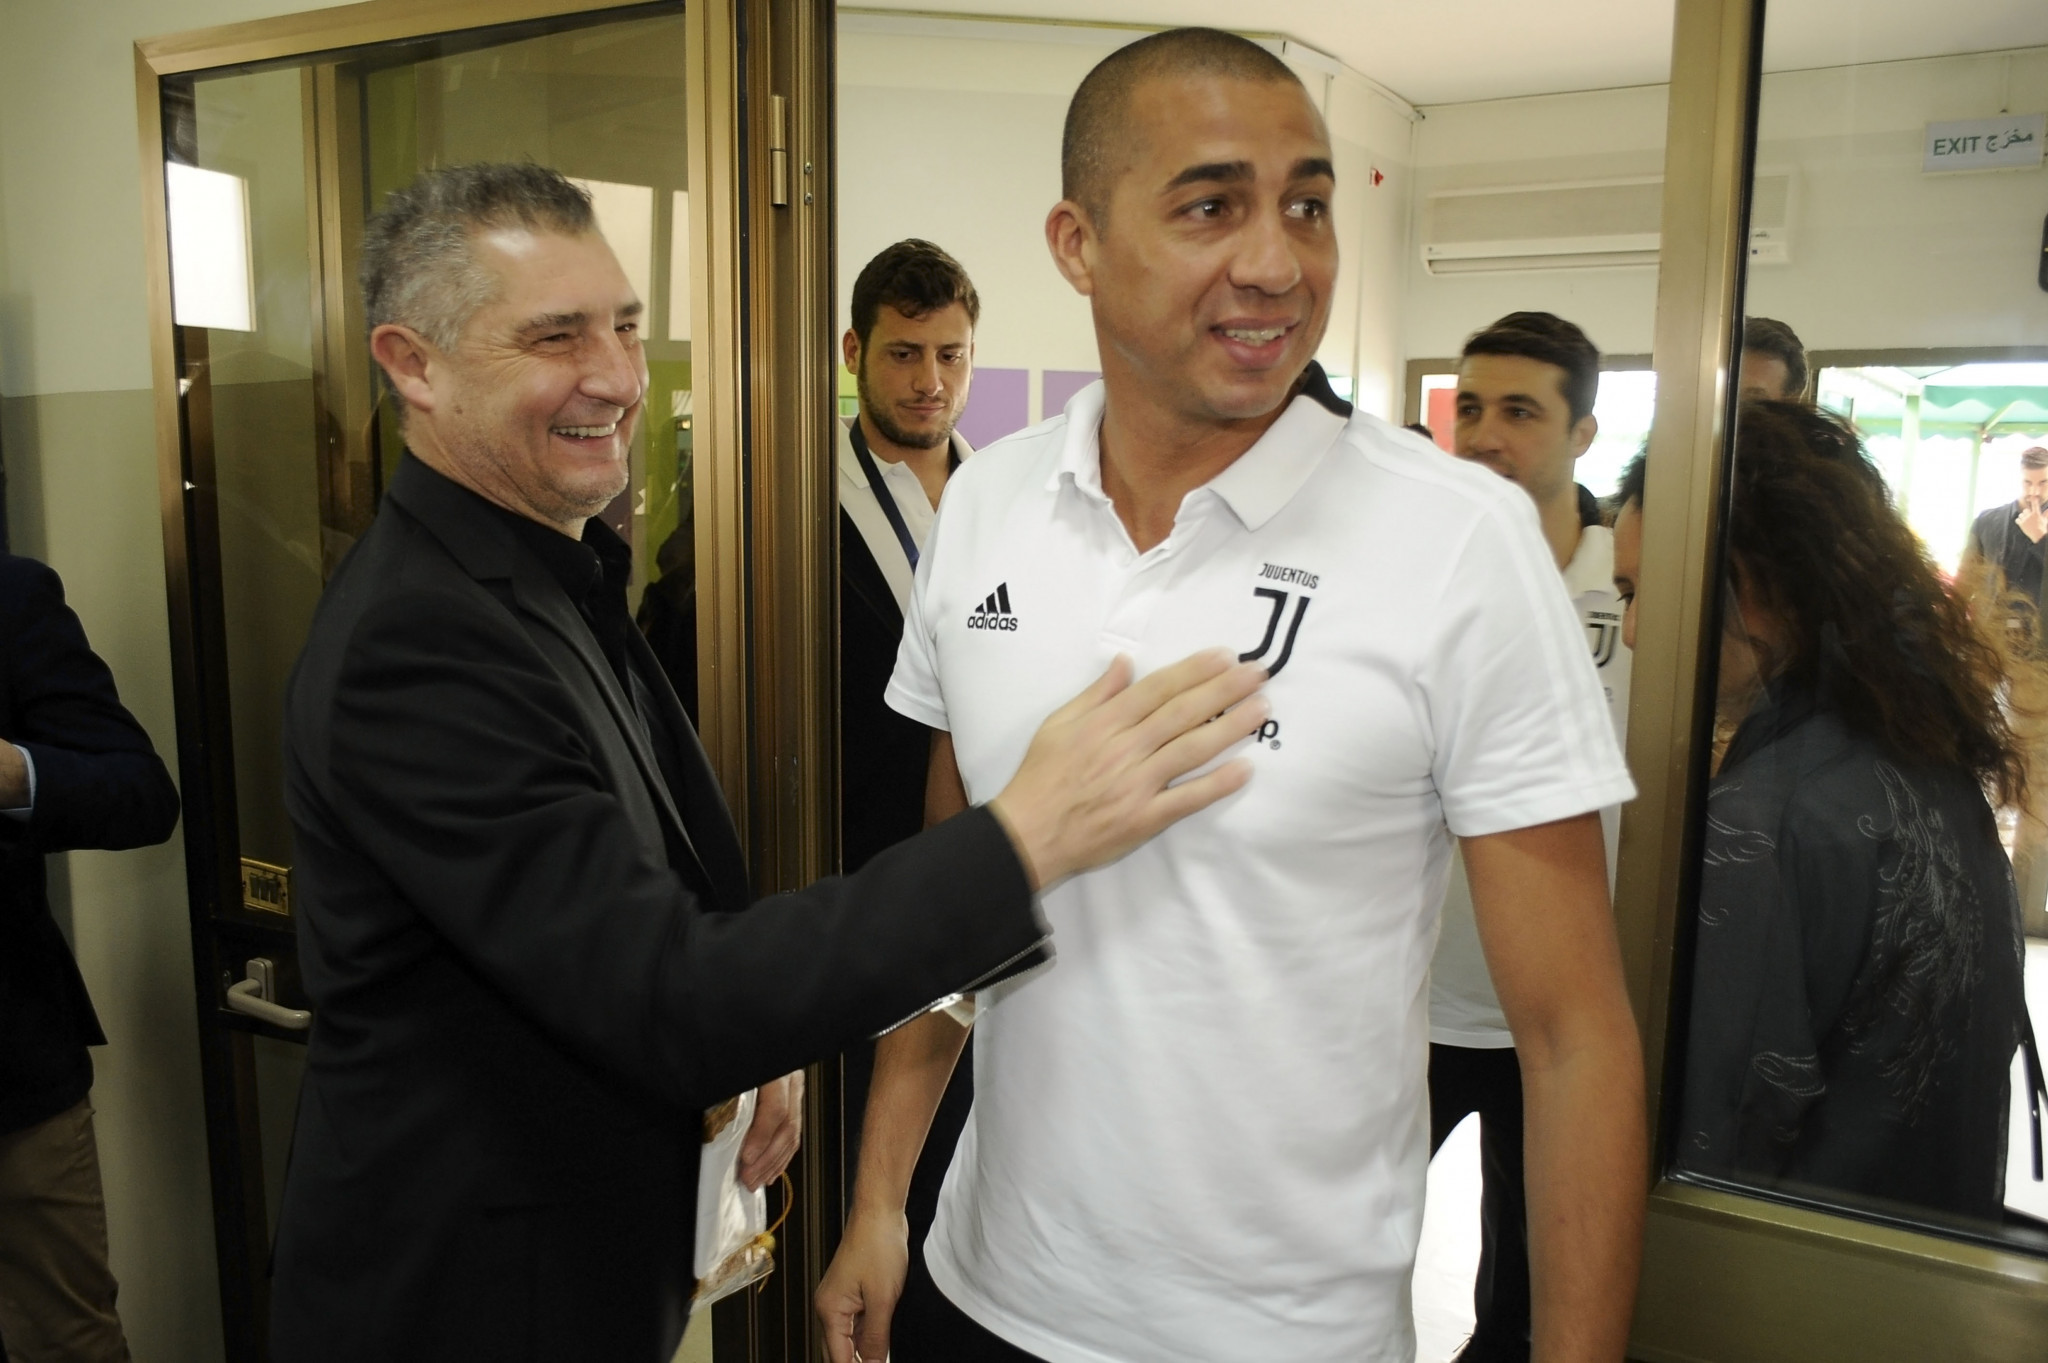 A legends match featuring France's Euro 2000 winner David Trezeguet is among the highlights of the one year to go celebrations for an event set to take place across the continent ©Getty Images